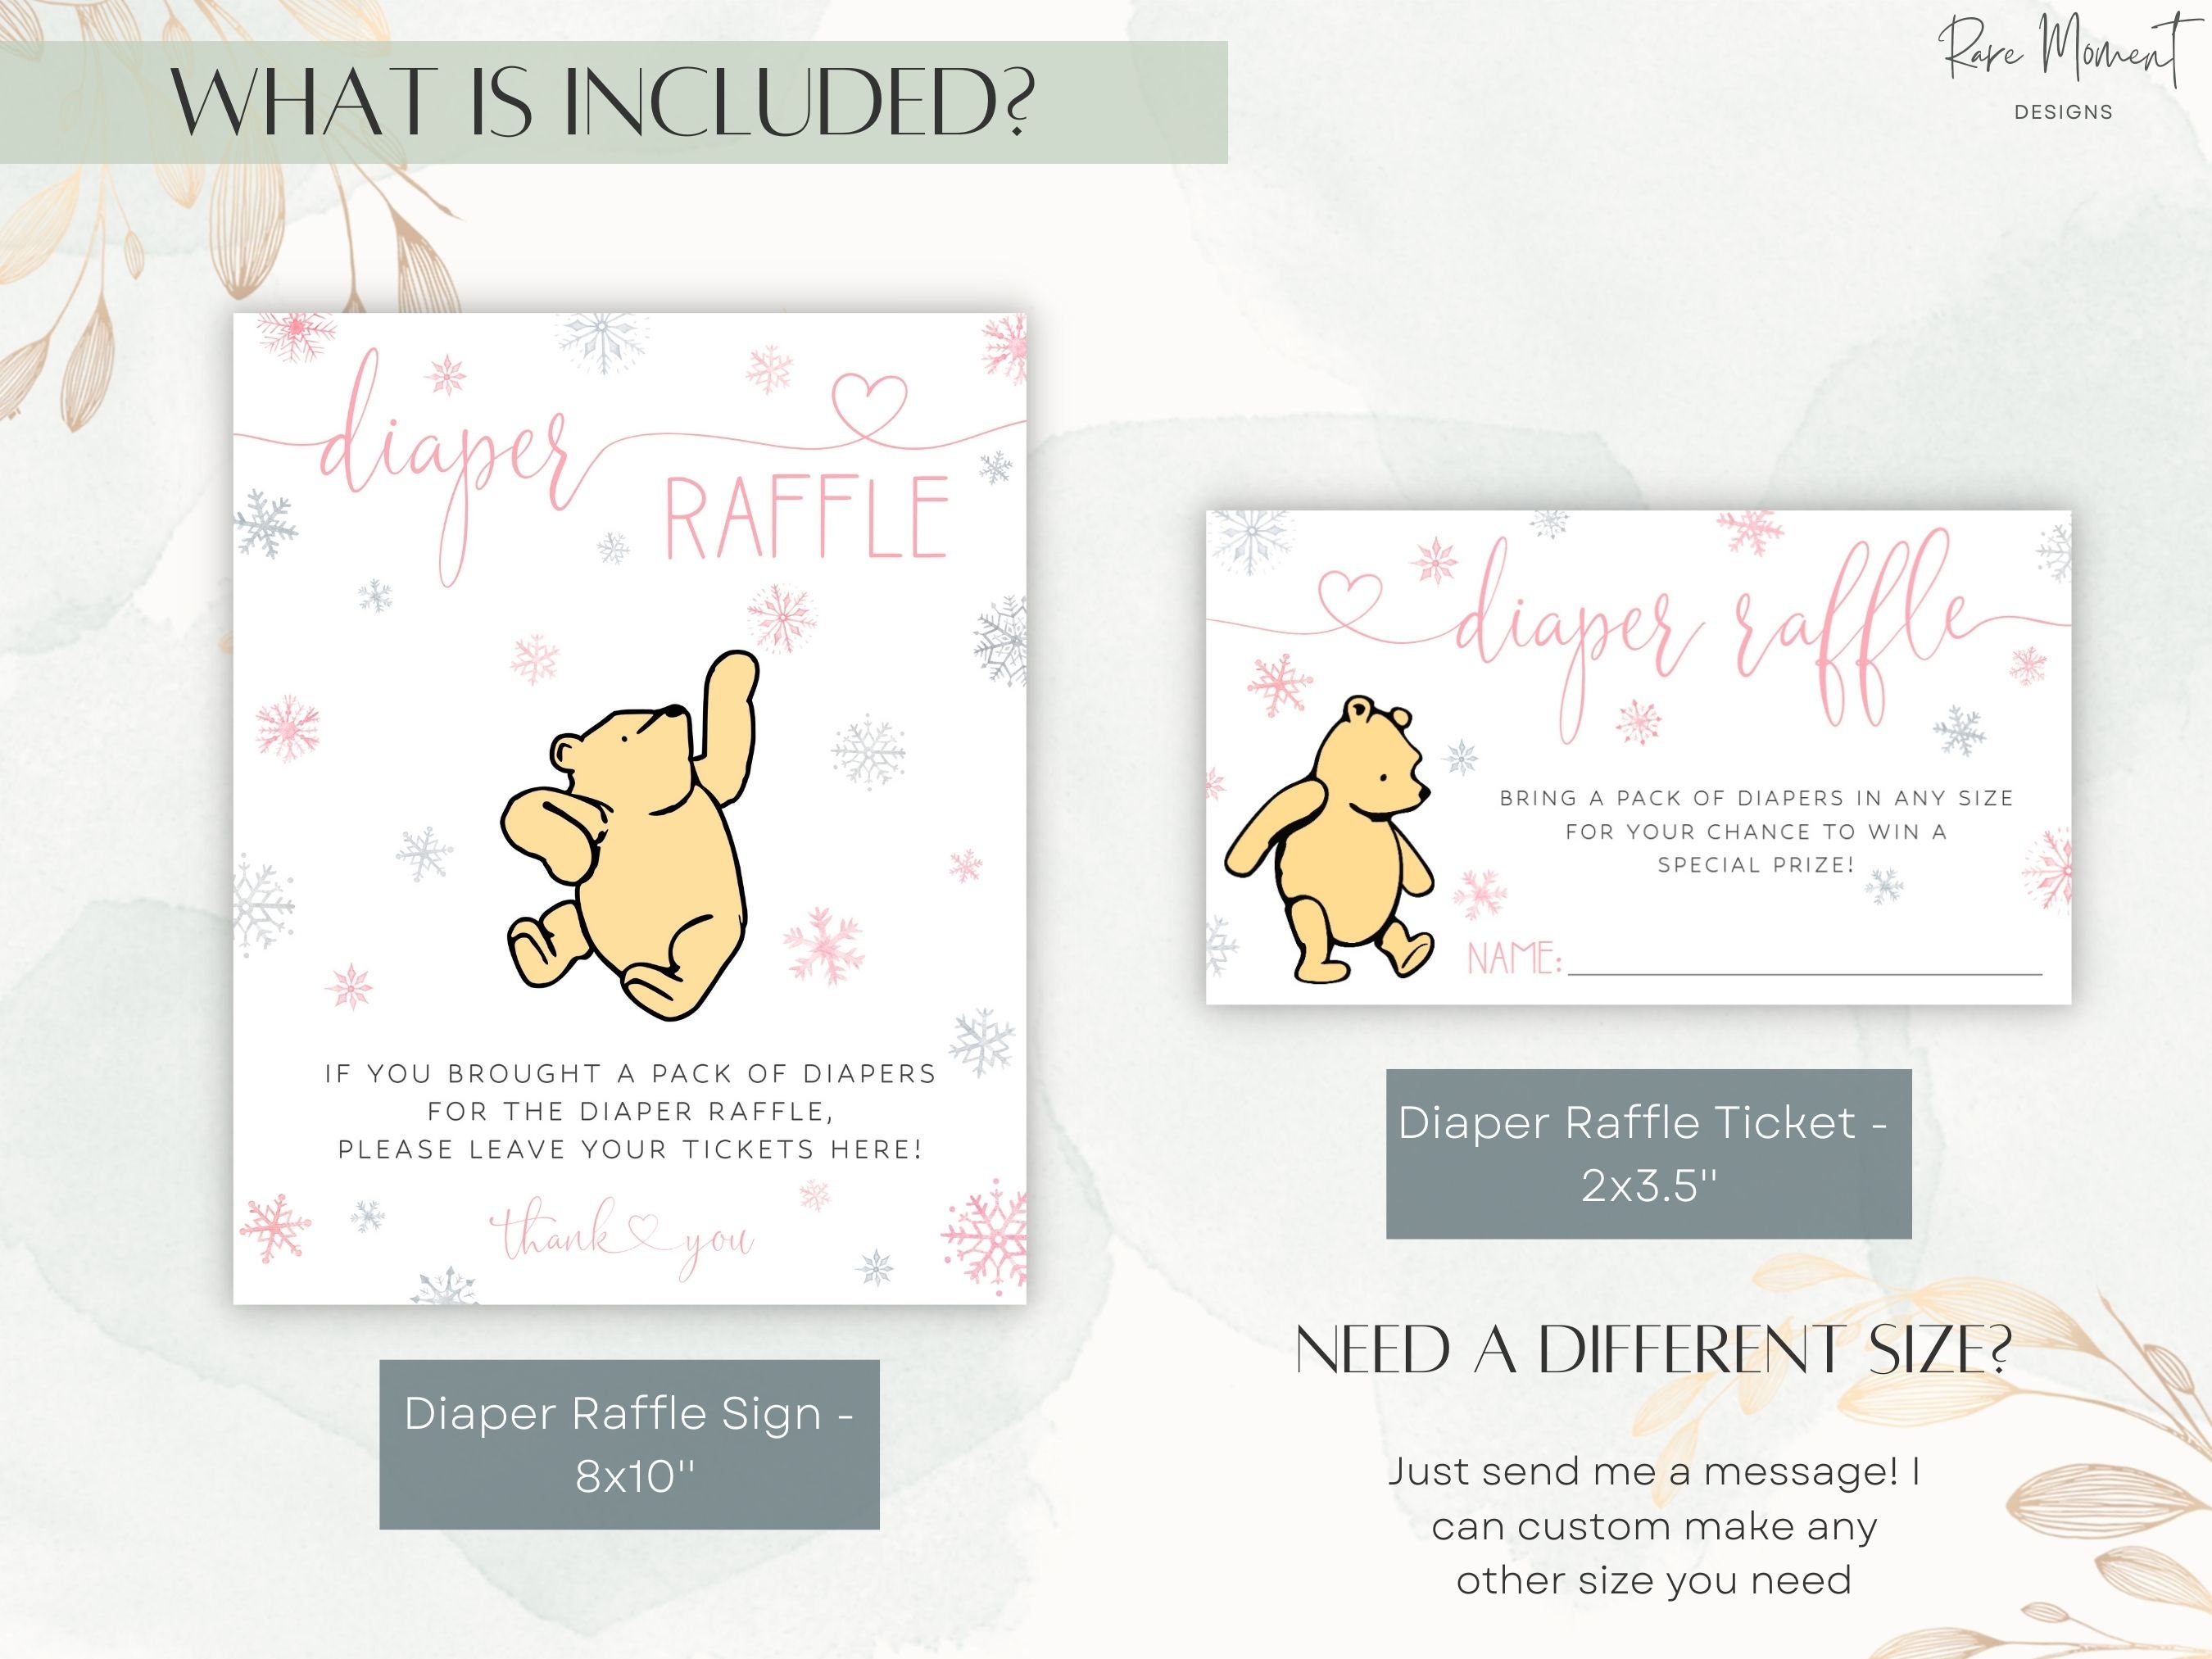 Winnie Diaper Raffle Tickets The Pooh Baby Shower Games Cute Invitations  Diaper Raffle Card For Gender Reveal Winnie Bee Theme Birthday Party Favors